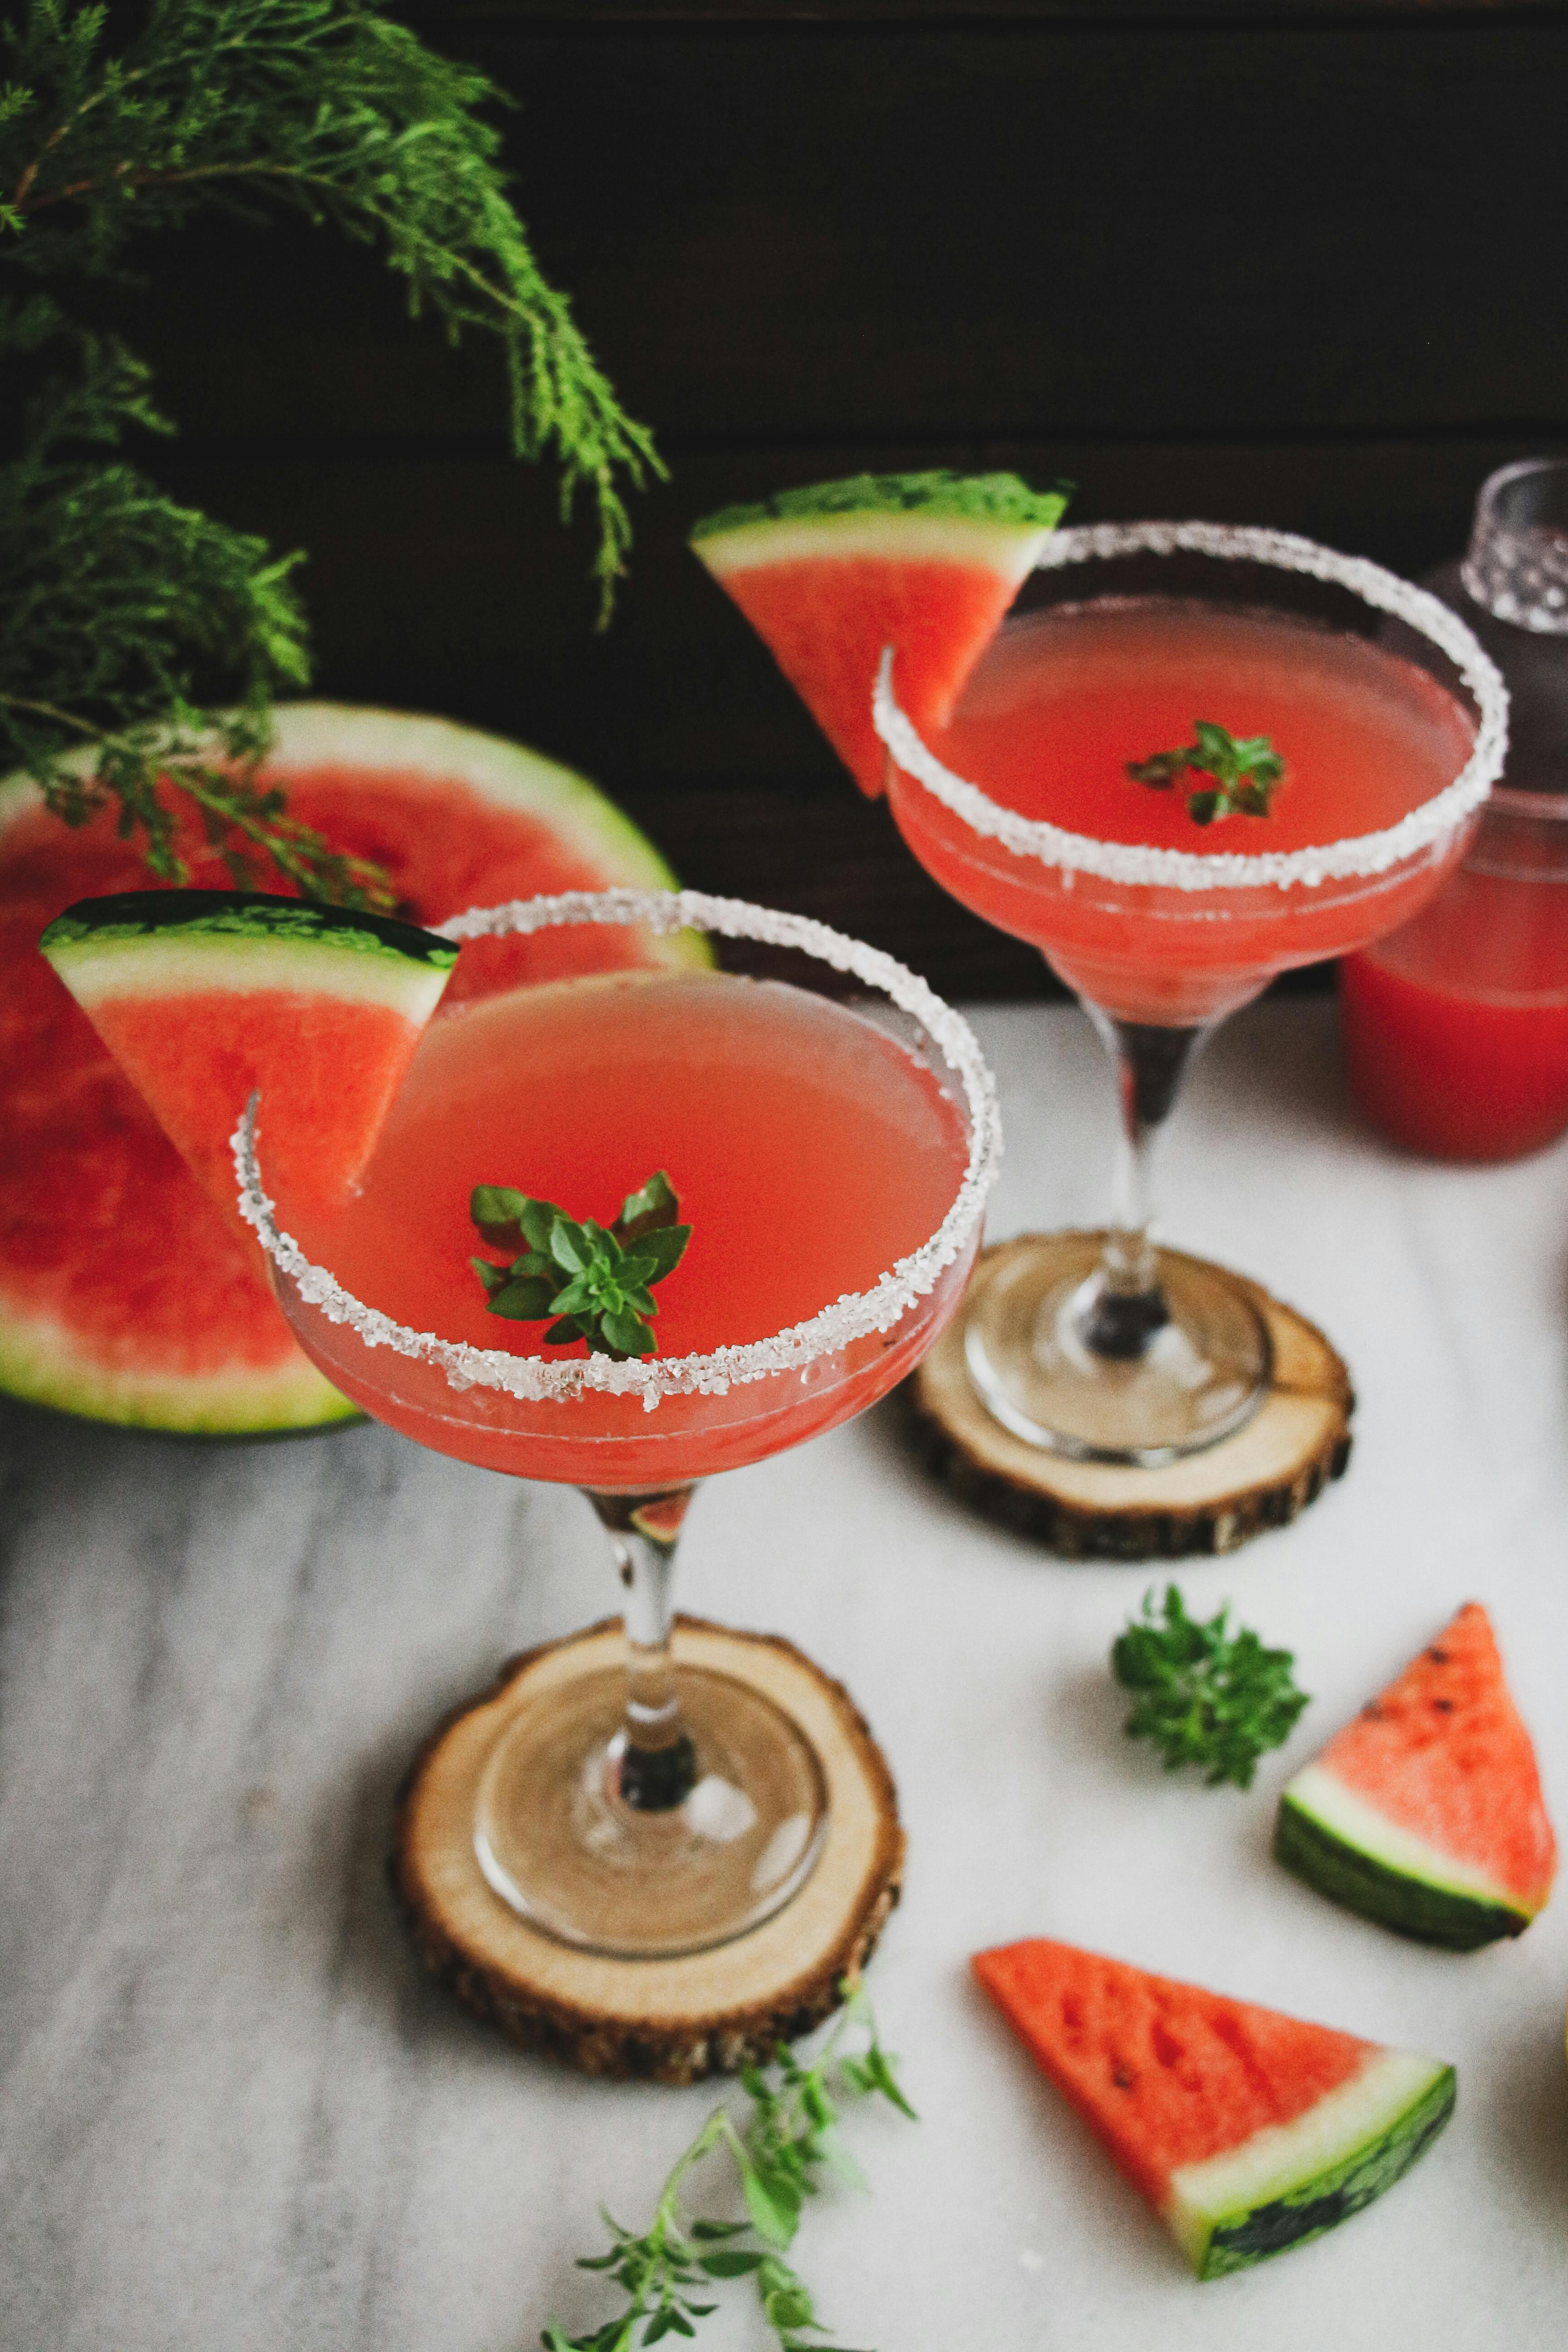 How to Make a Watermelon Sangria That Will Make Your Guests Go Wow!